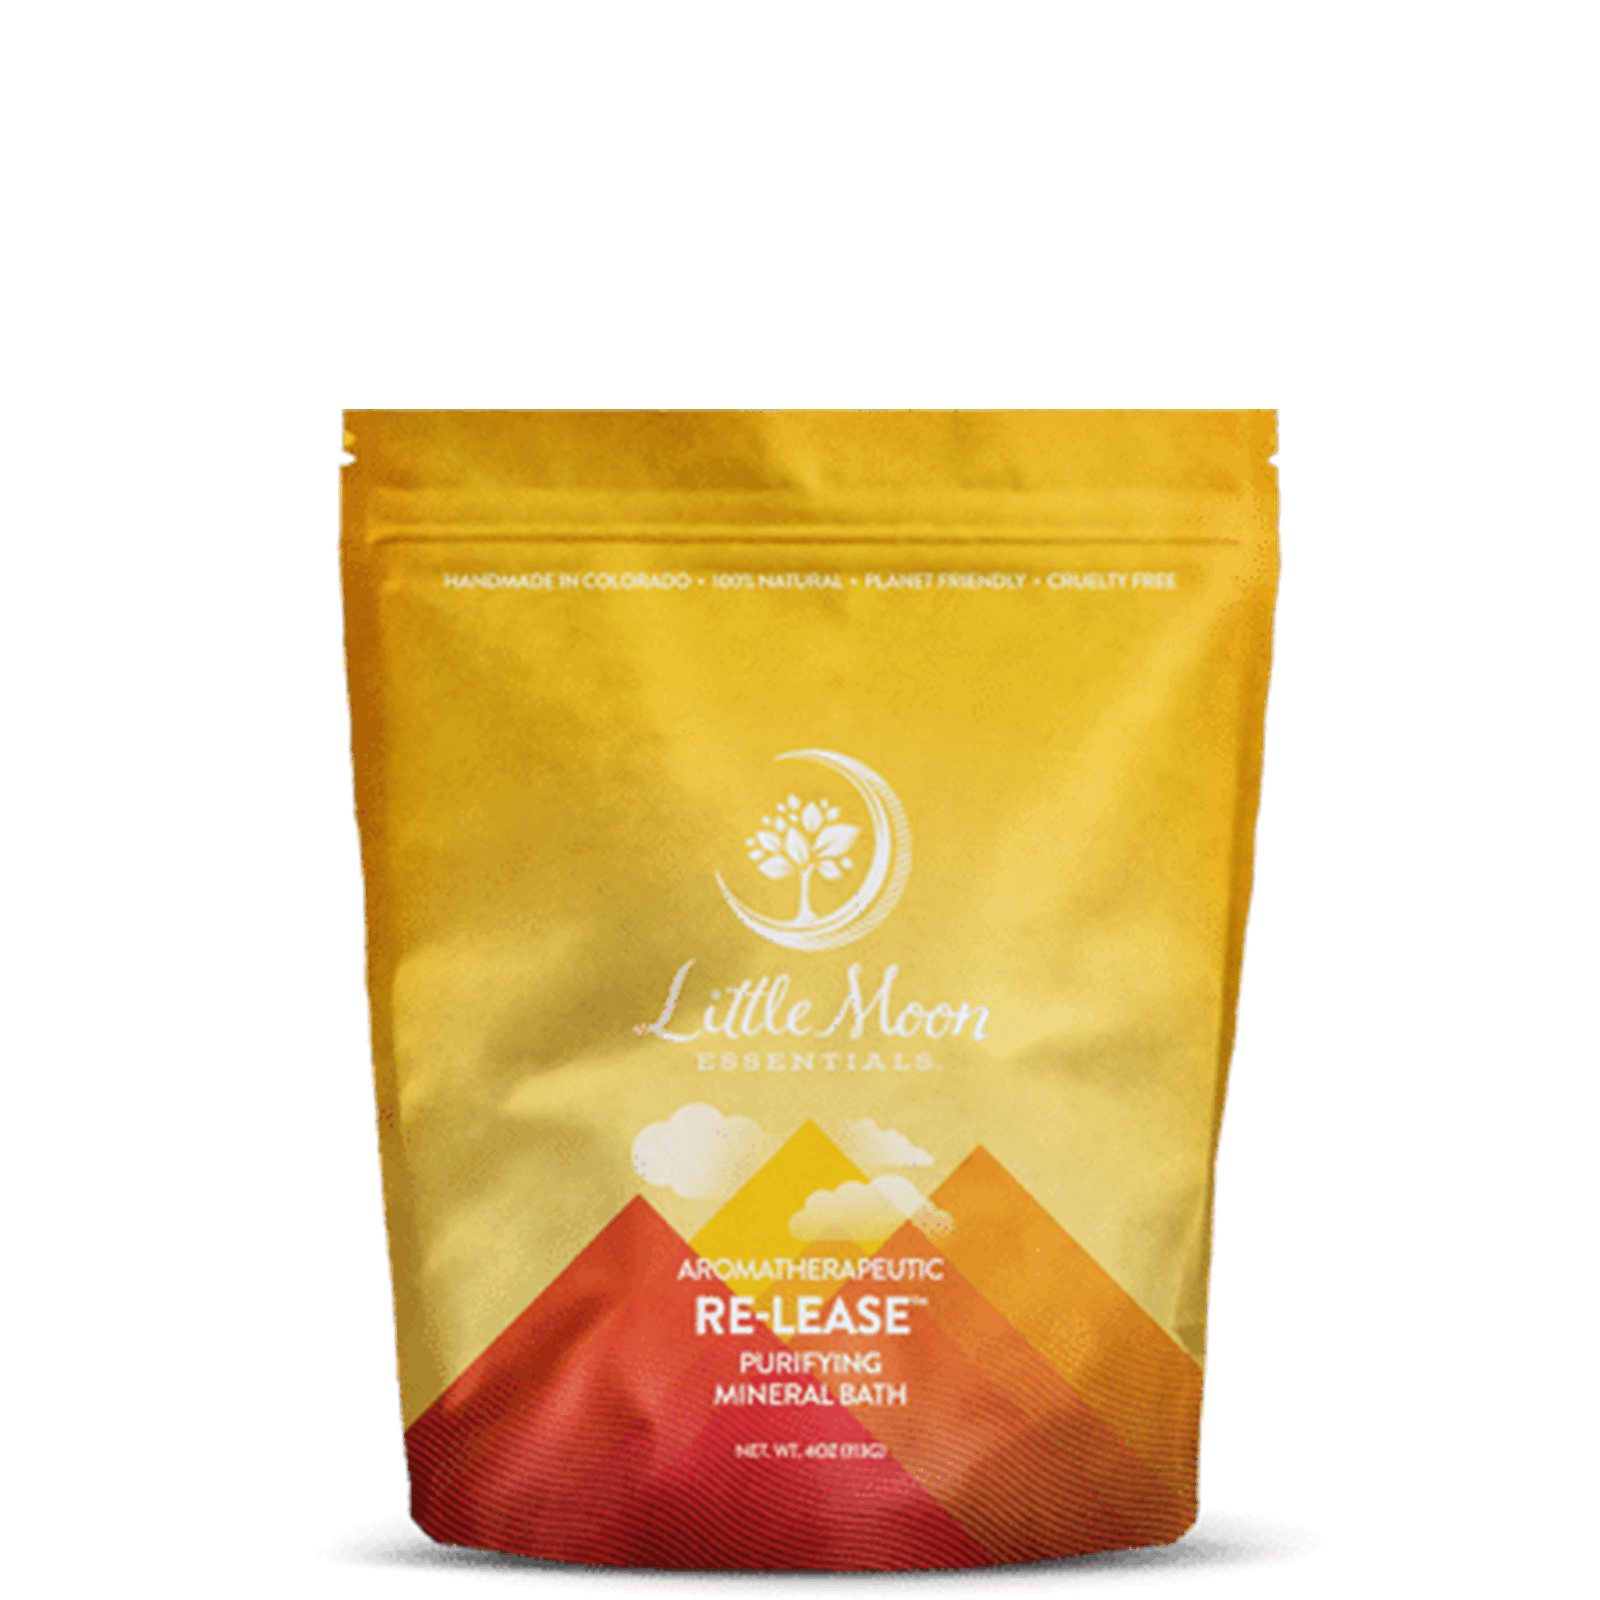 Re-lease™ Mineral Bath - Little Moon Essentials